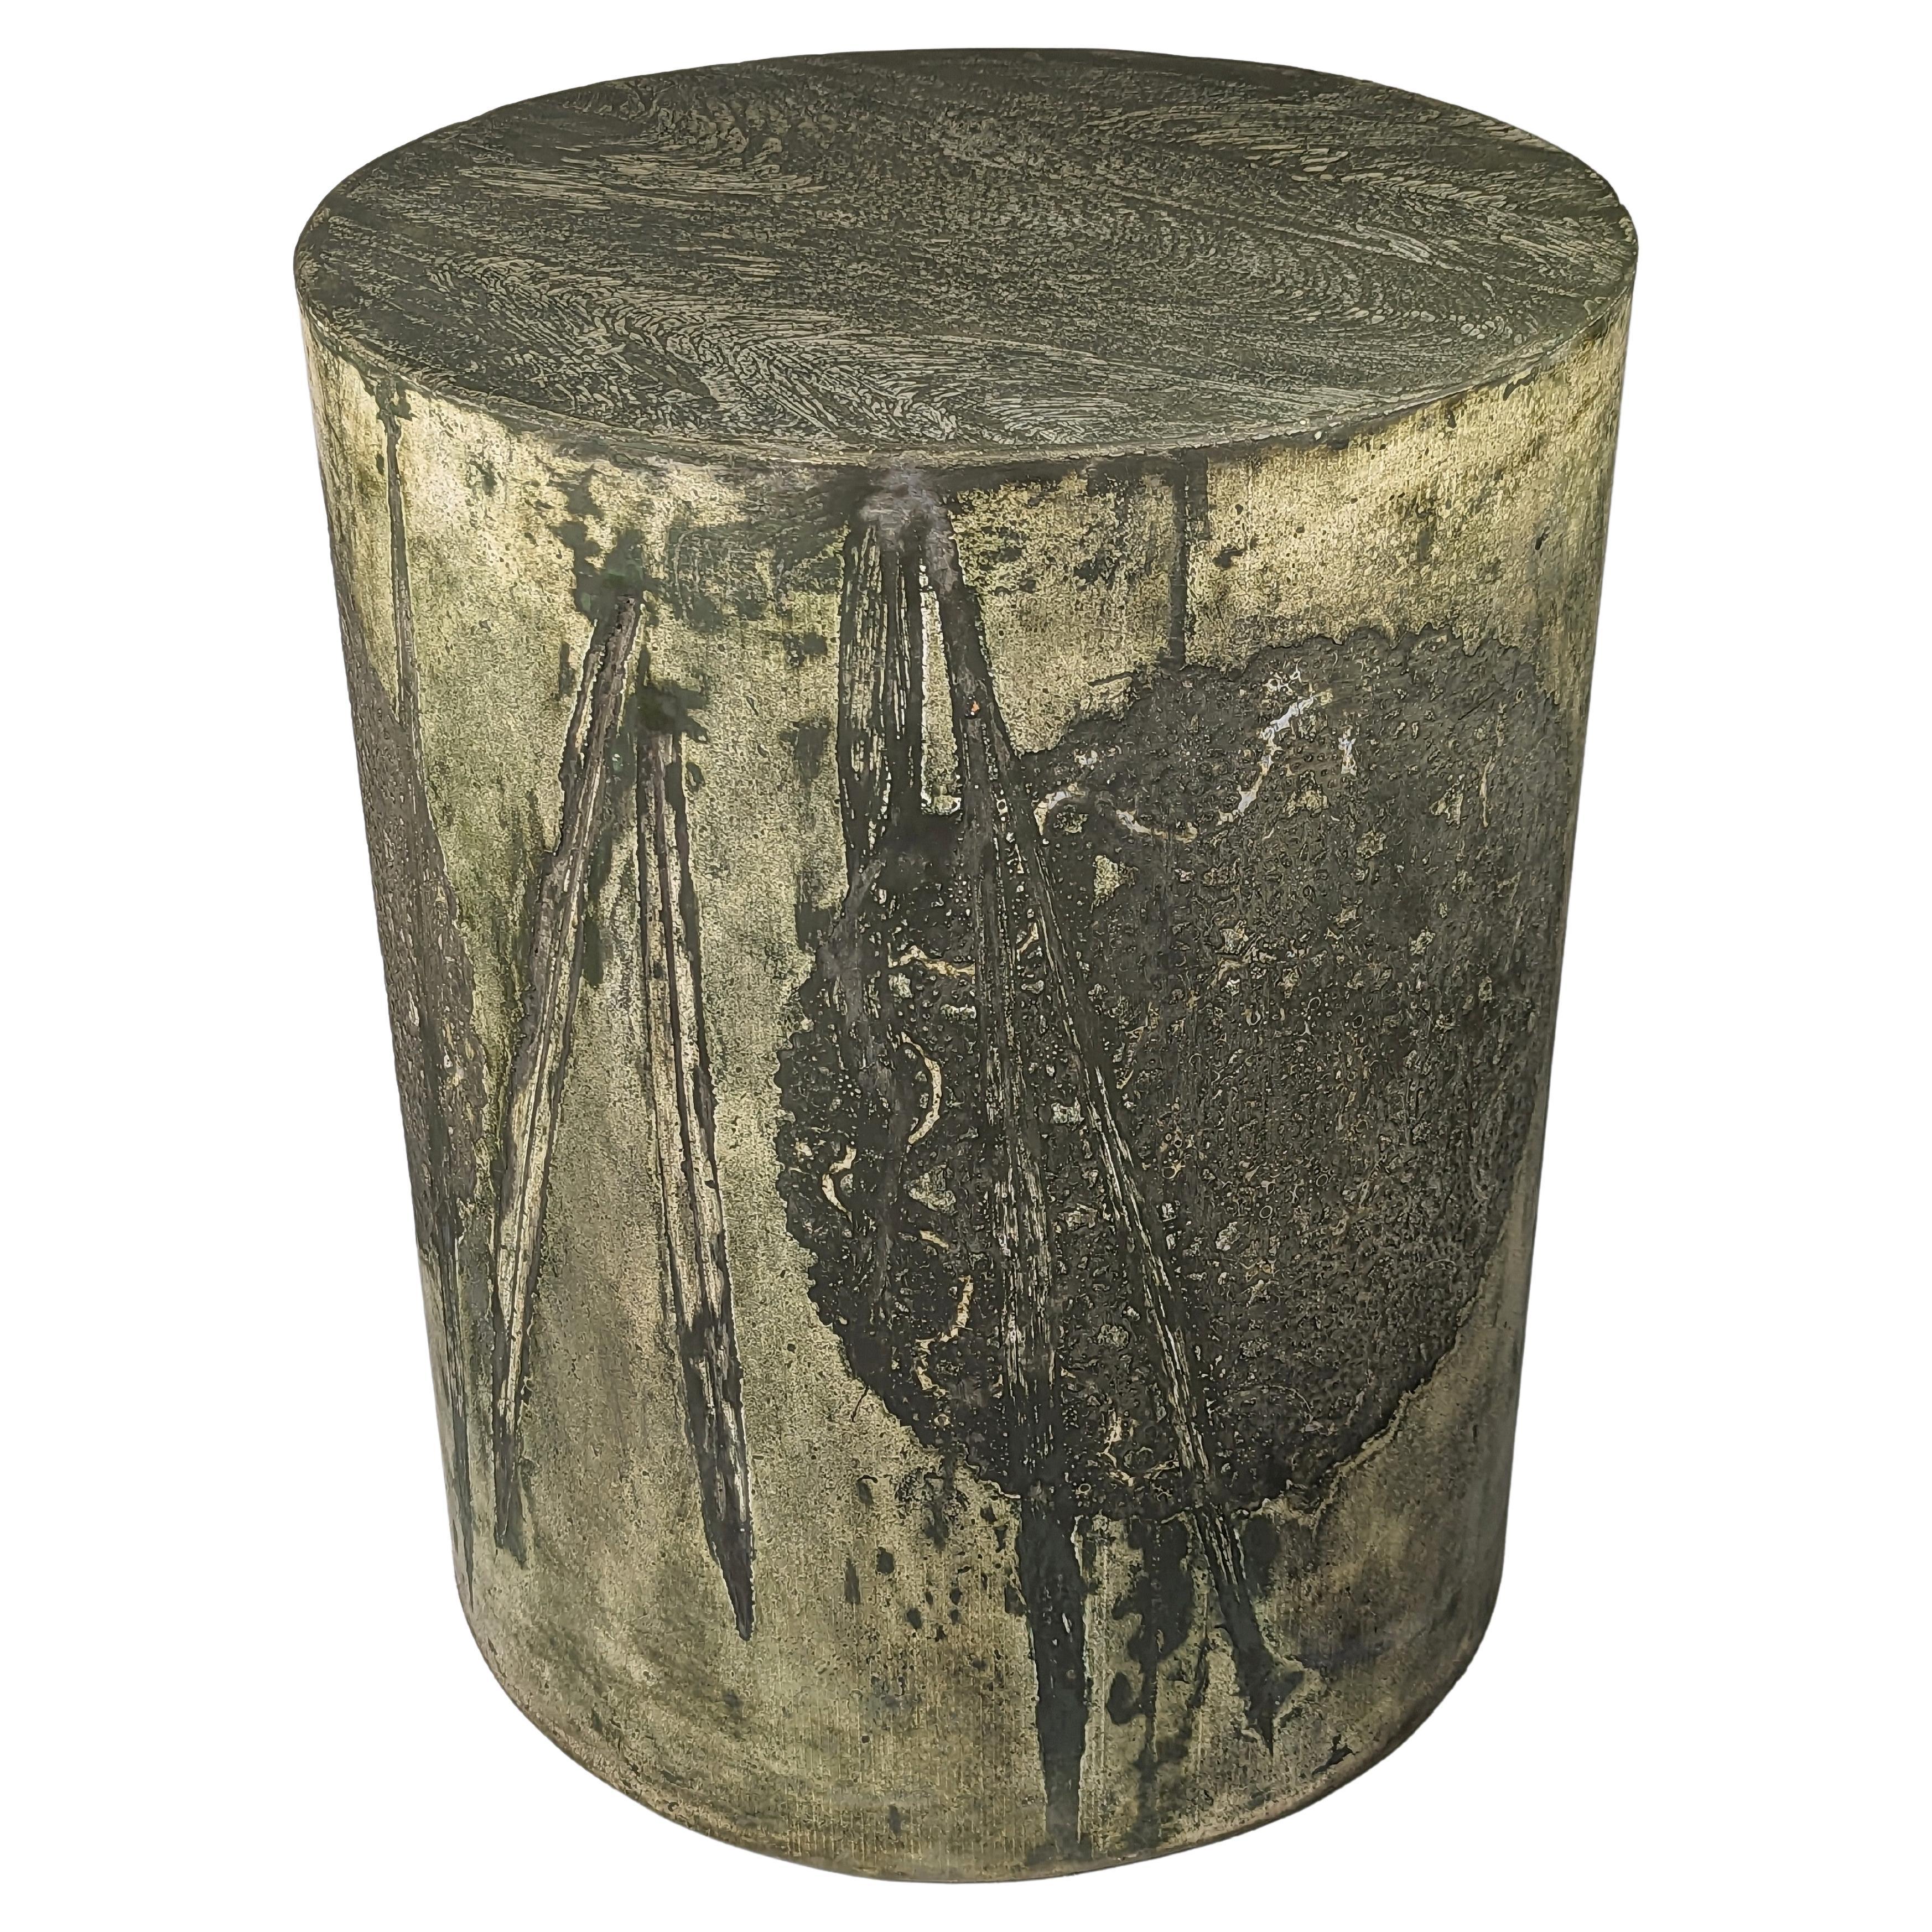 Green Concrete Side Table with Intricate Pattern, 'Unearthed Lineage'